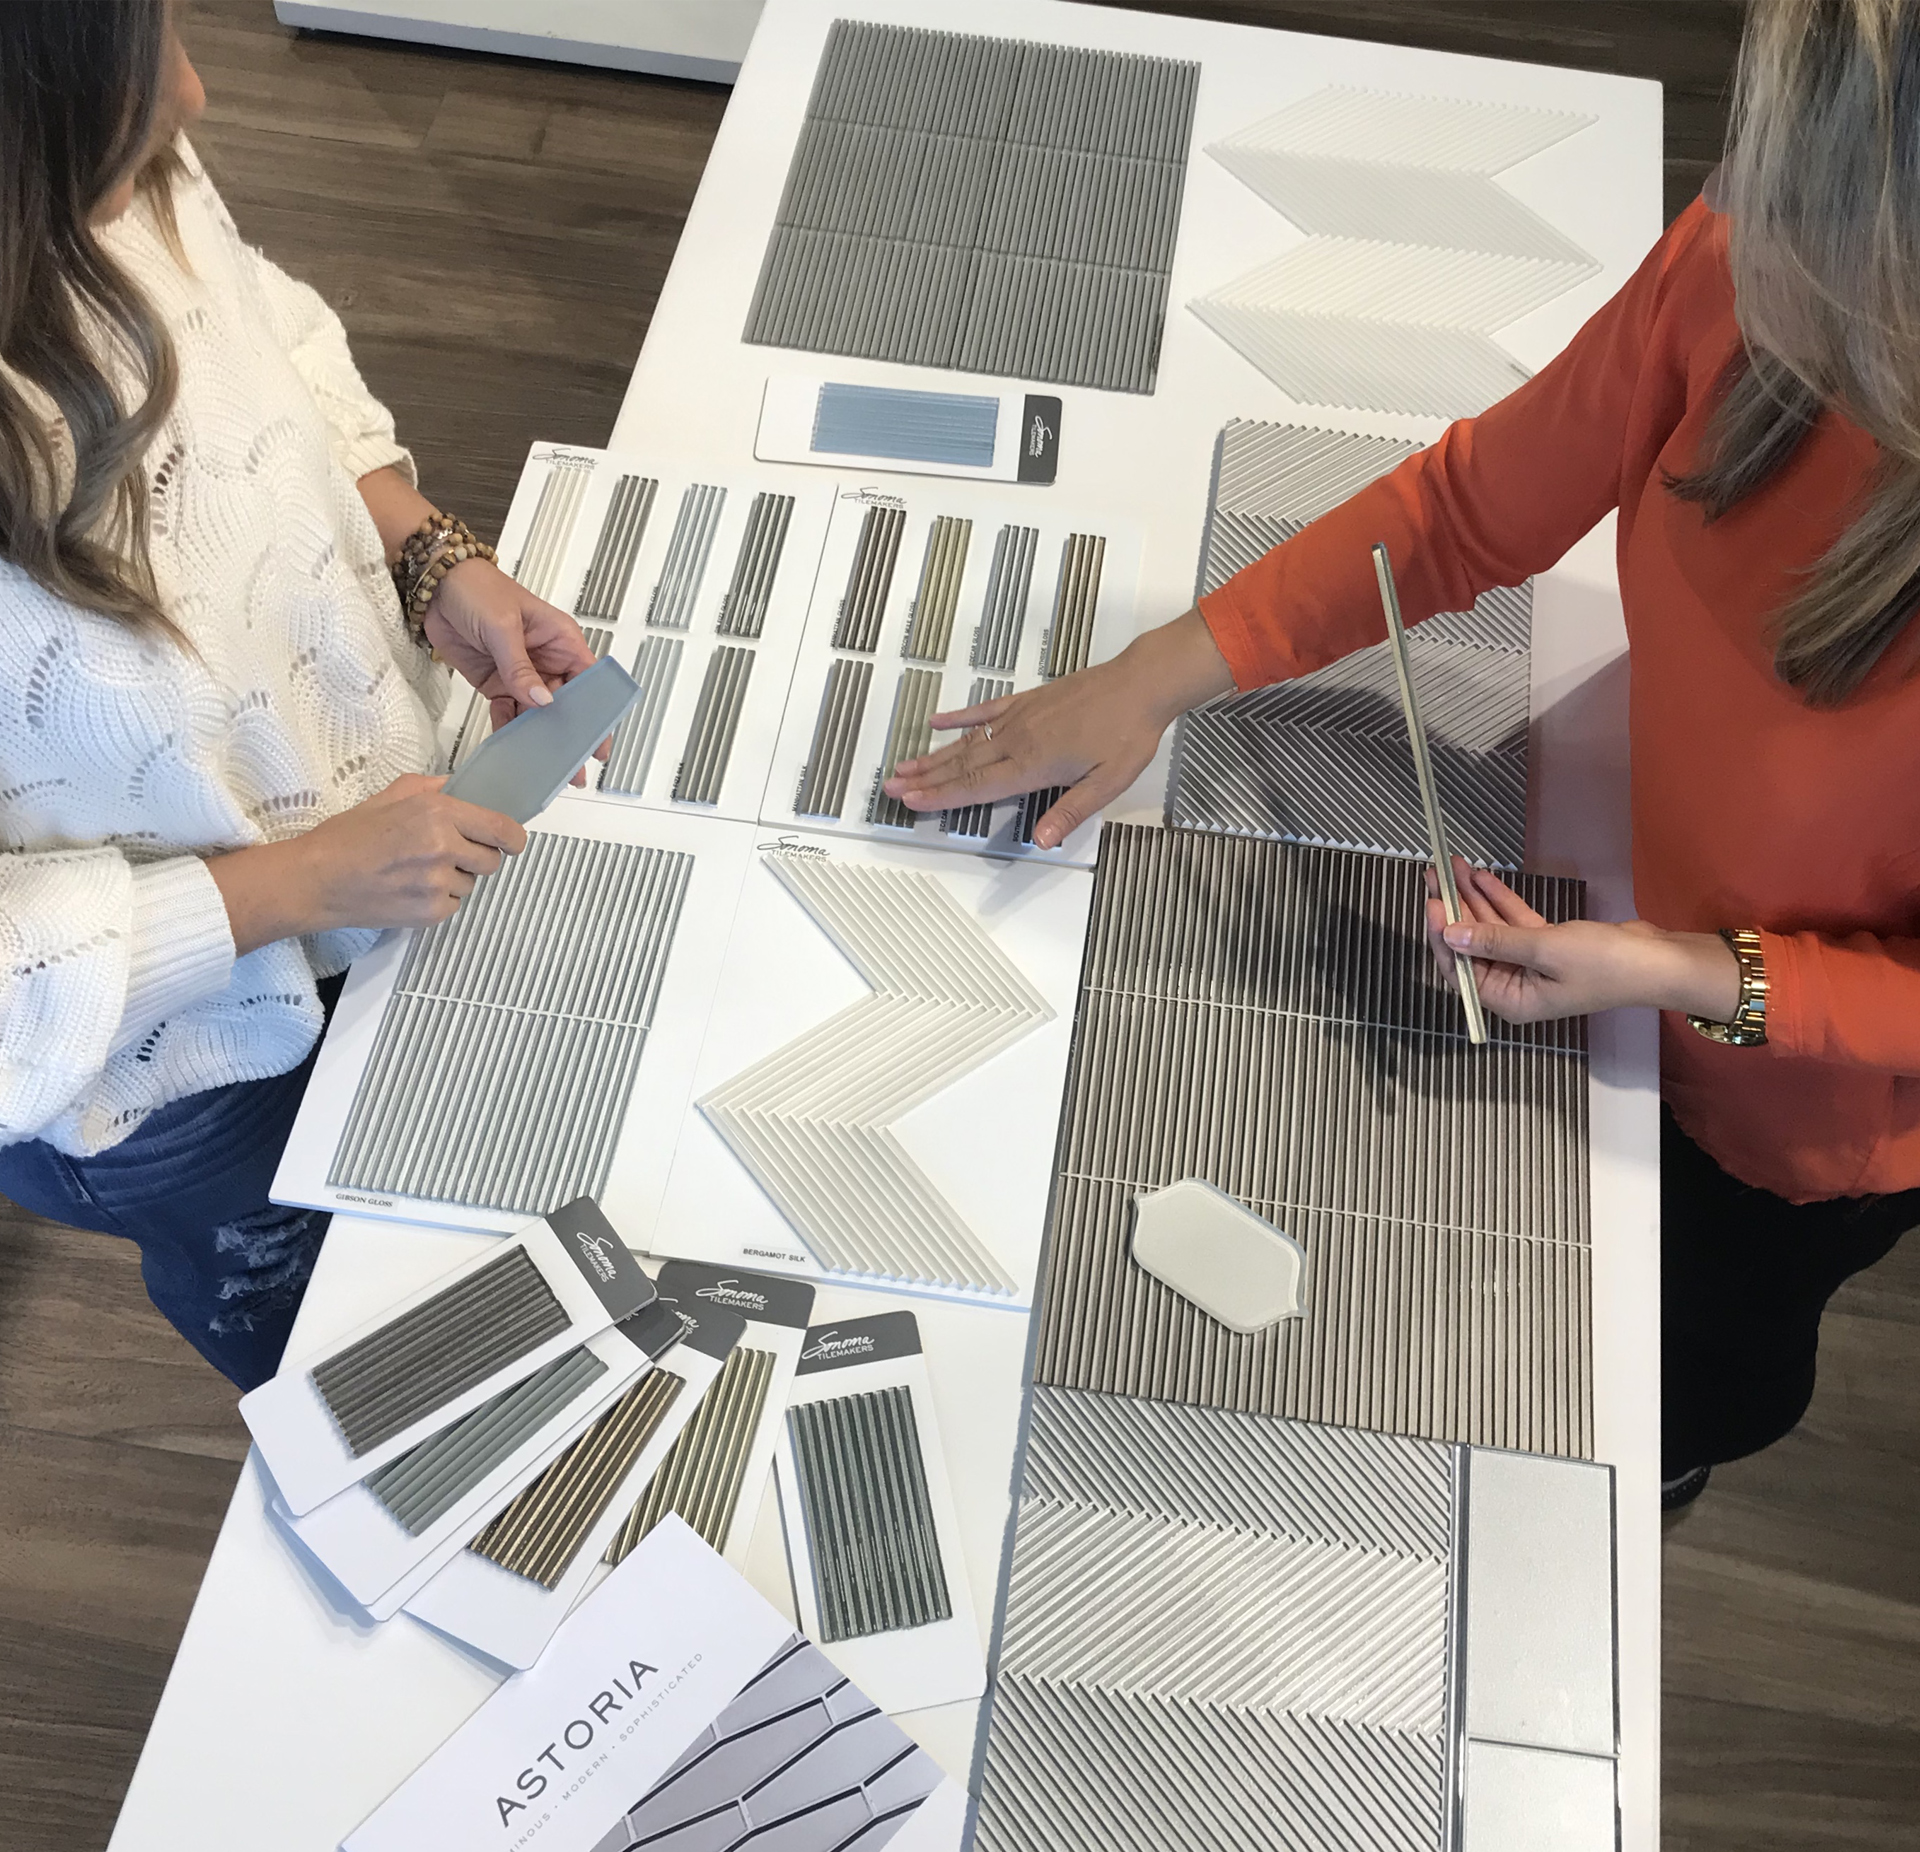 Tile America sales support staff consulting a project